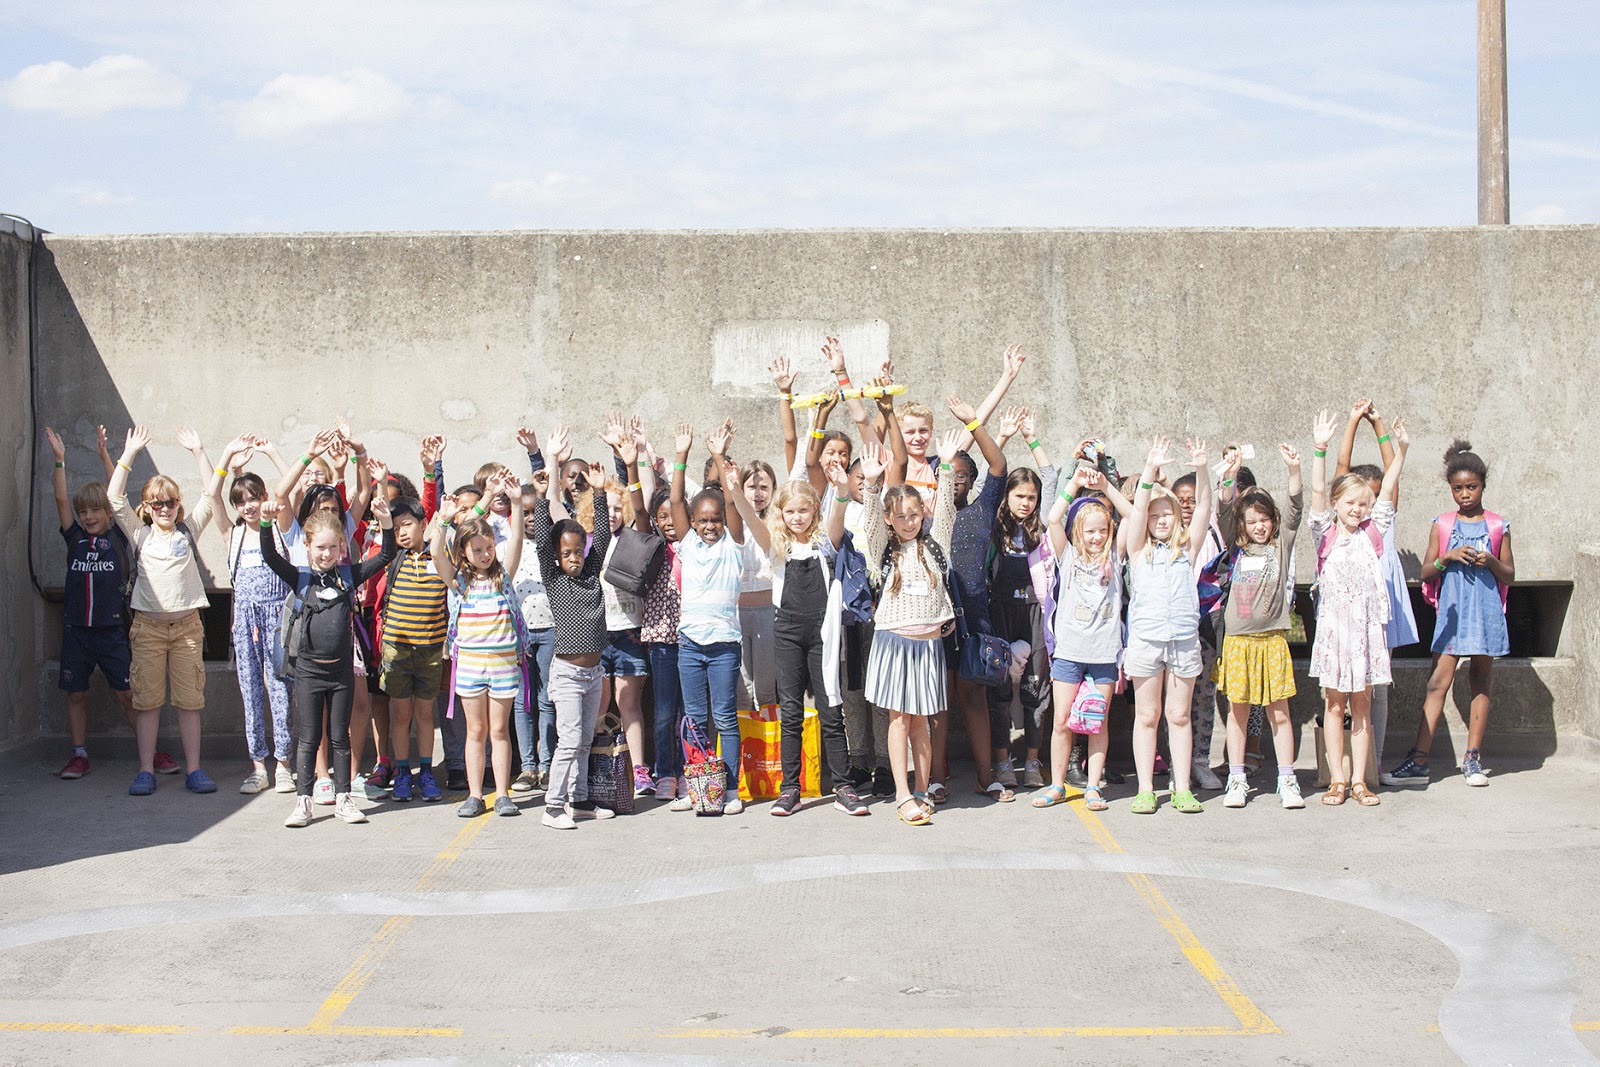 ID: a full classroom of 30 young school children and their teachers stand in front of a concrete wall on a large rooftop with their hands in the air and smiling.